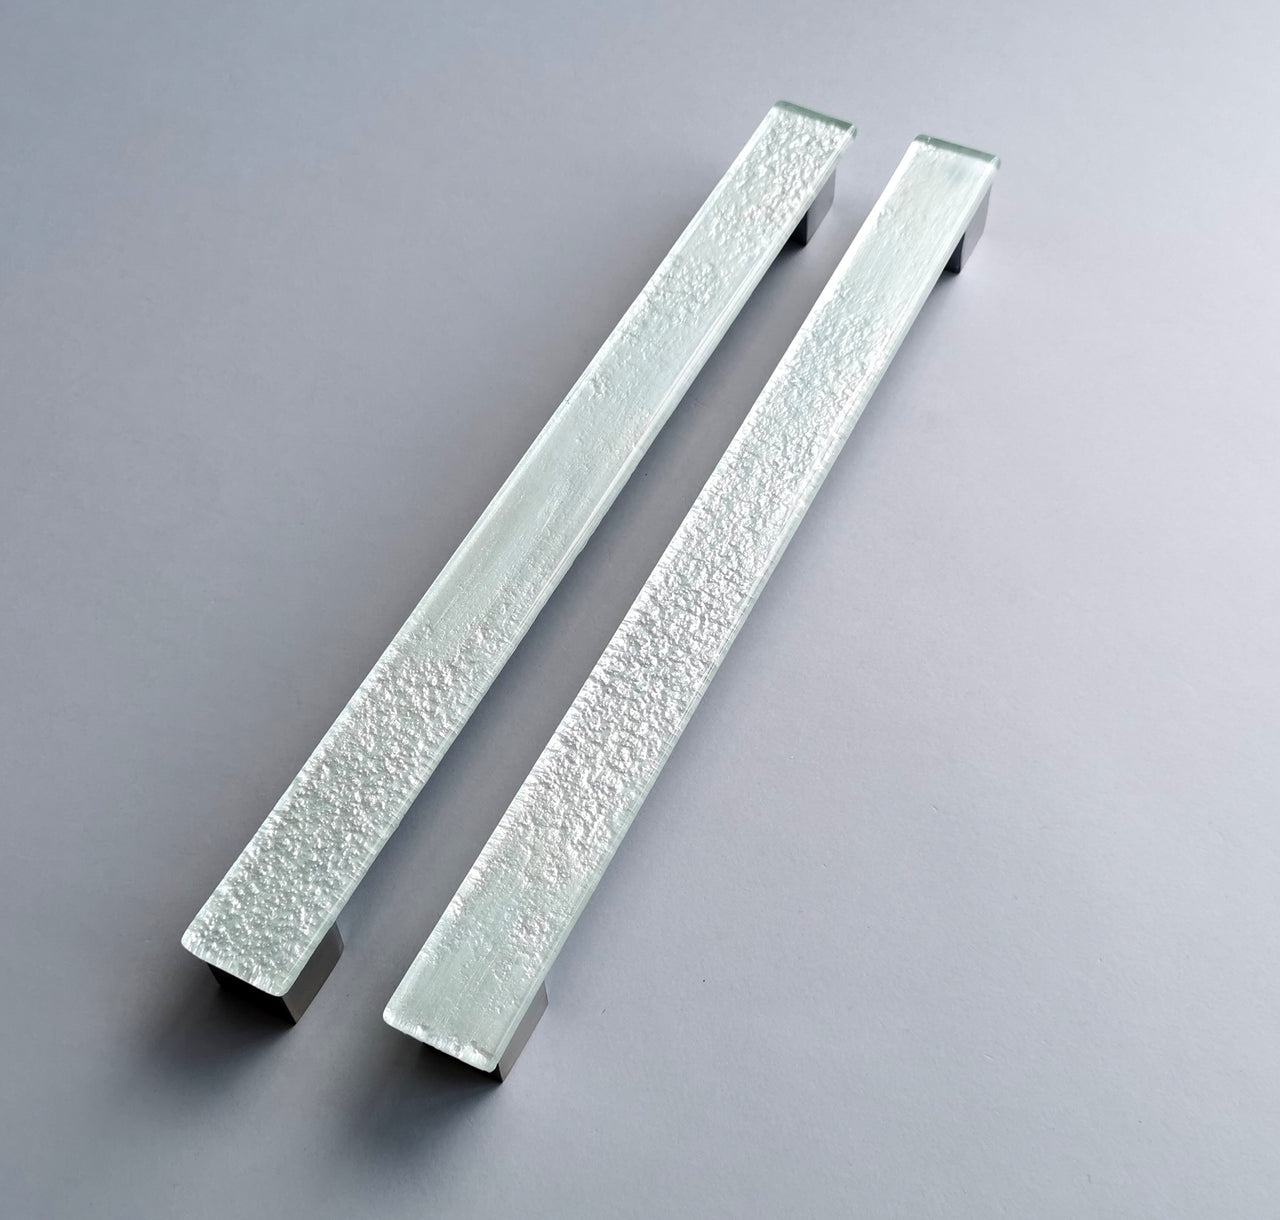 A Set of 2 Large Glass Pulls in Pearl White. Pearl White Glass Pull. White Cabinet Handle - 0016